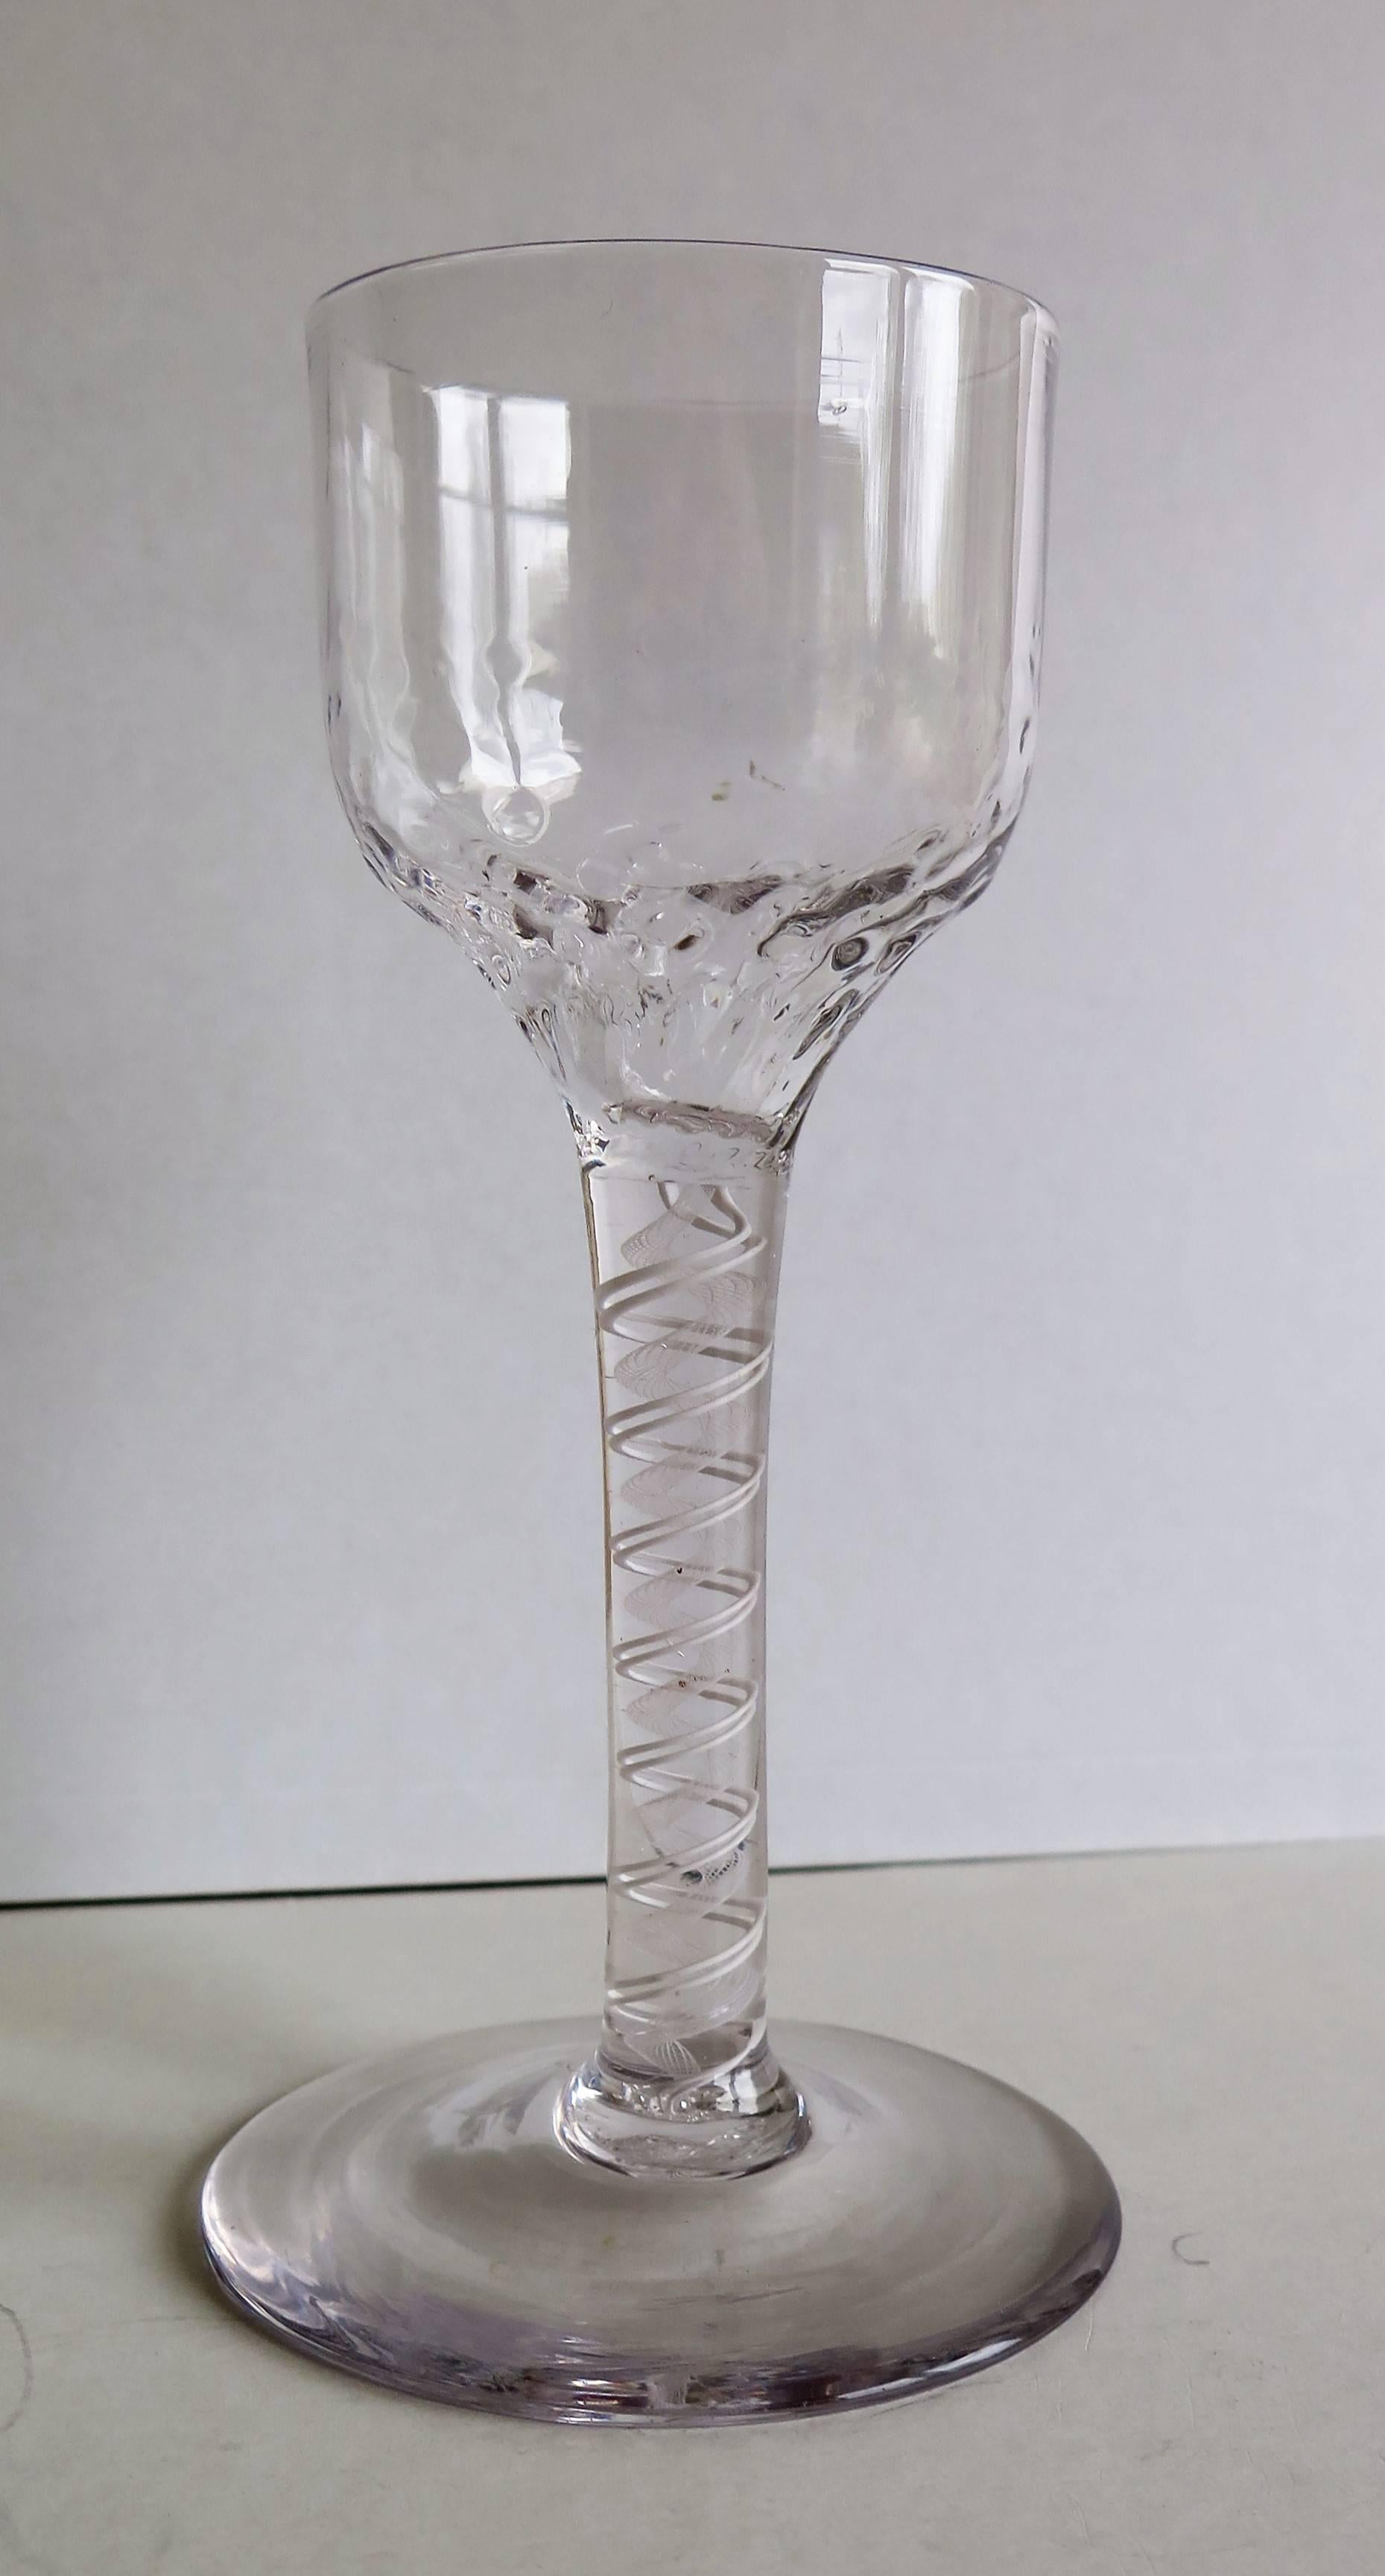 This is a good hand-blown, English, mid-Georgian, Cordial drinking glass with a double series, cotton or opaque twist (DSOT) stem, dating from the middle of the 18th century, circa 1765.

These glasses are very collectable. It is made from English